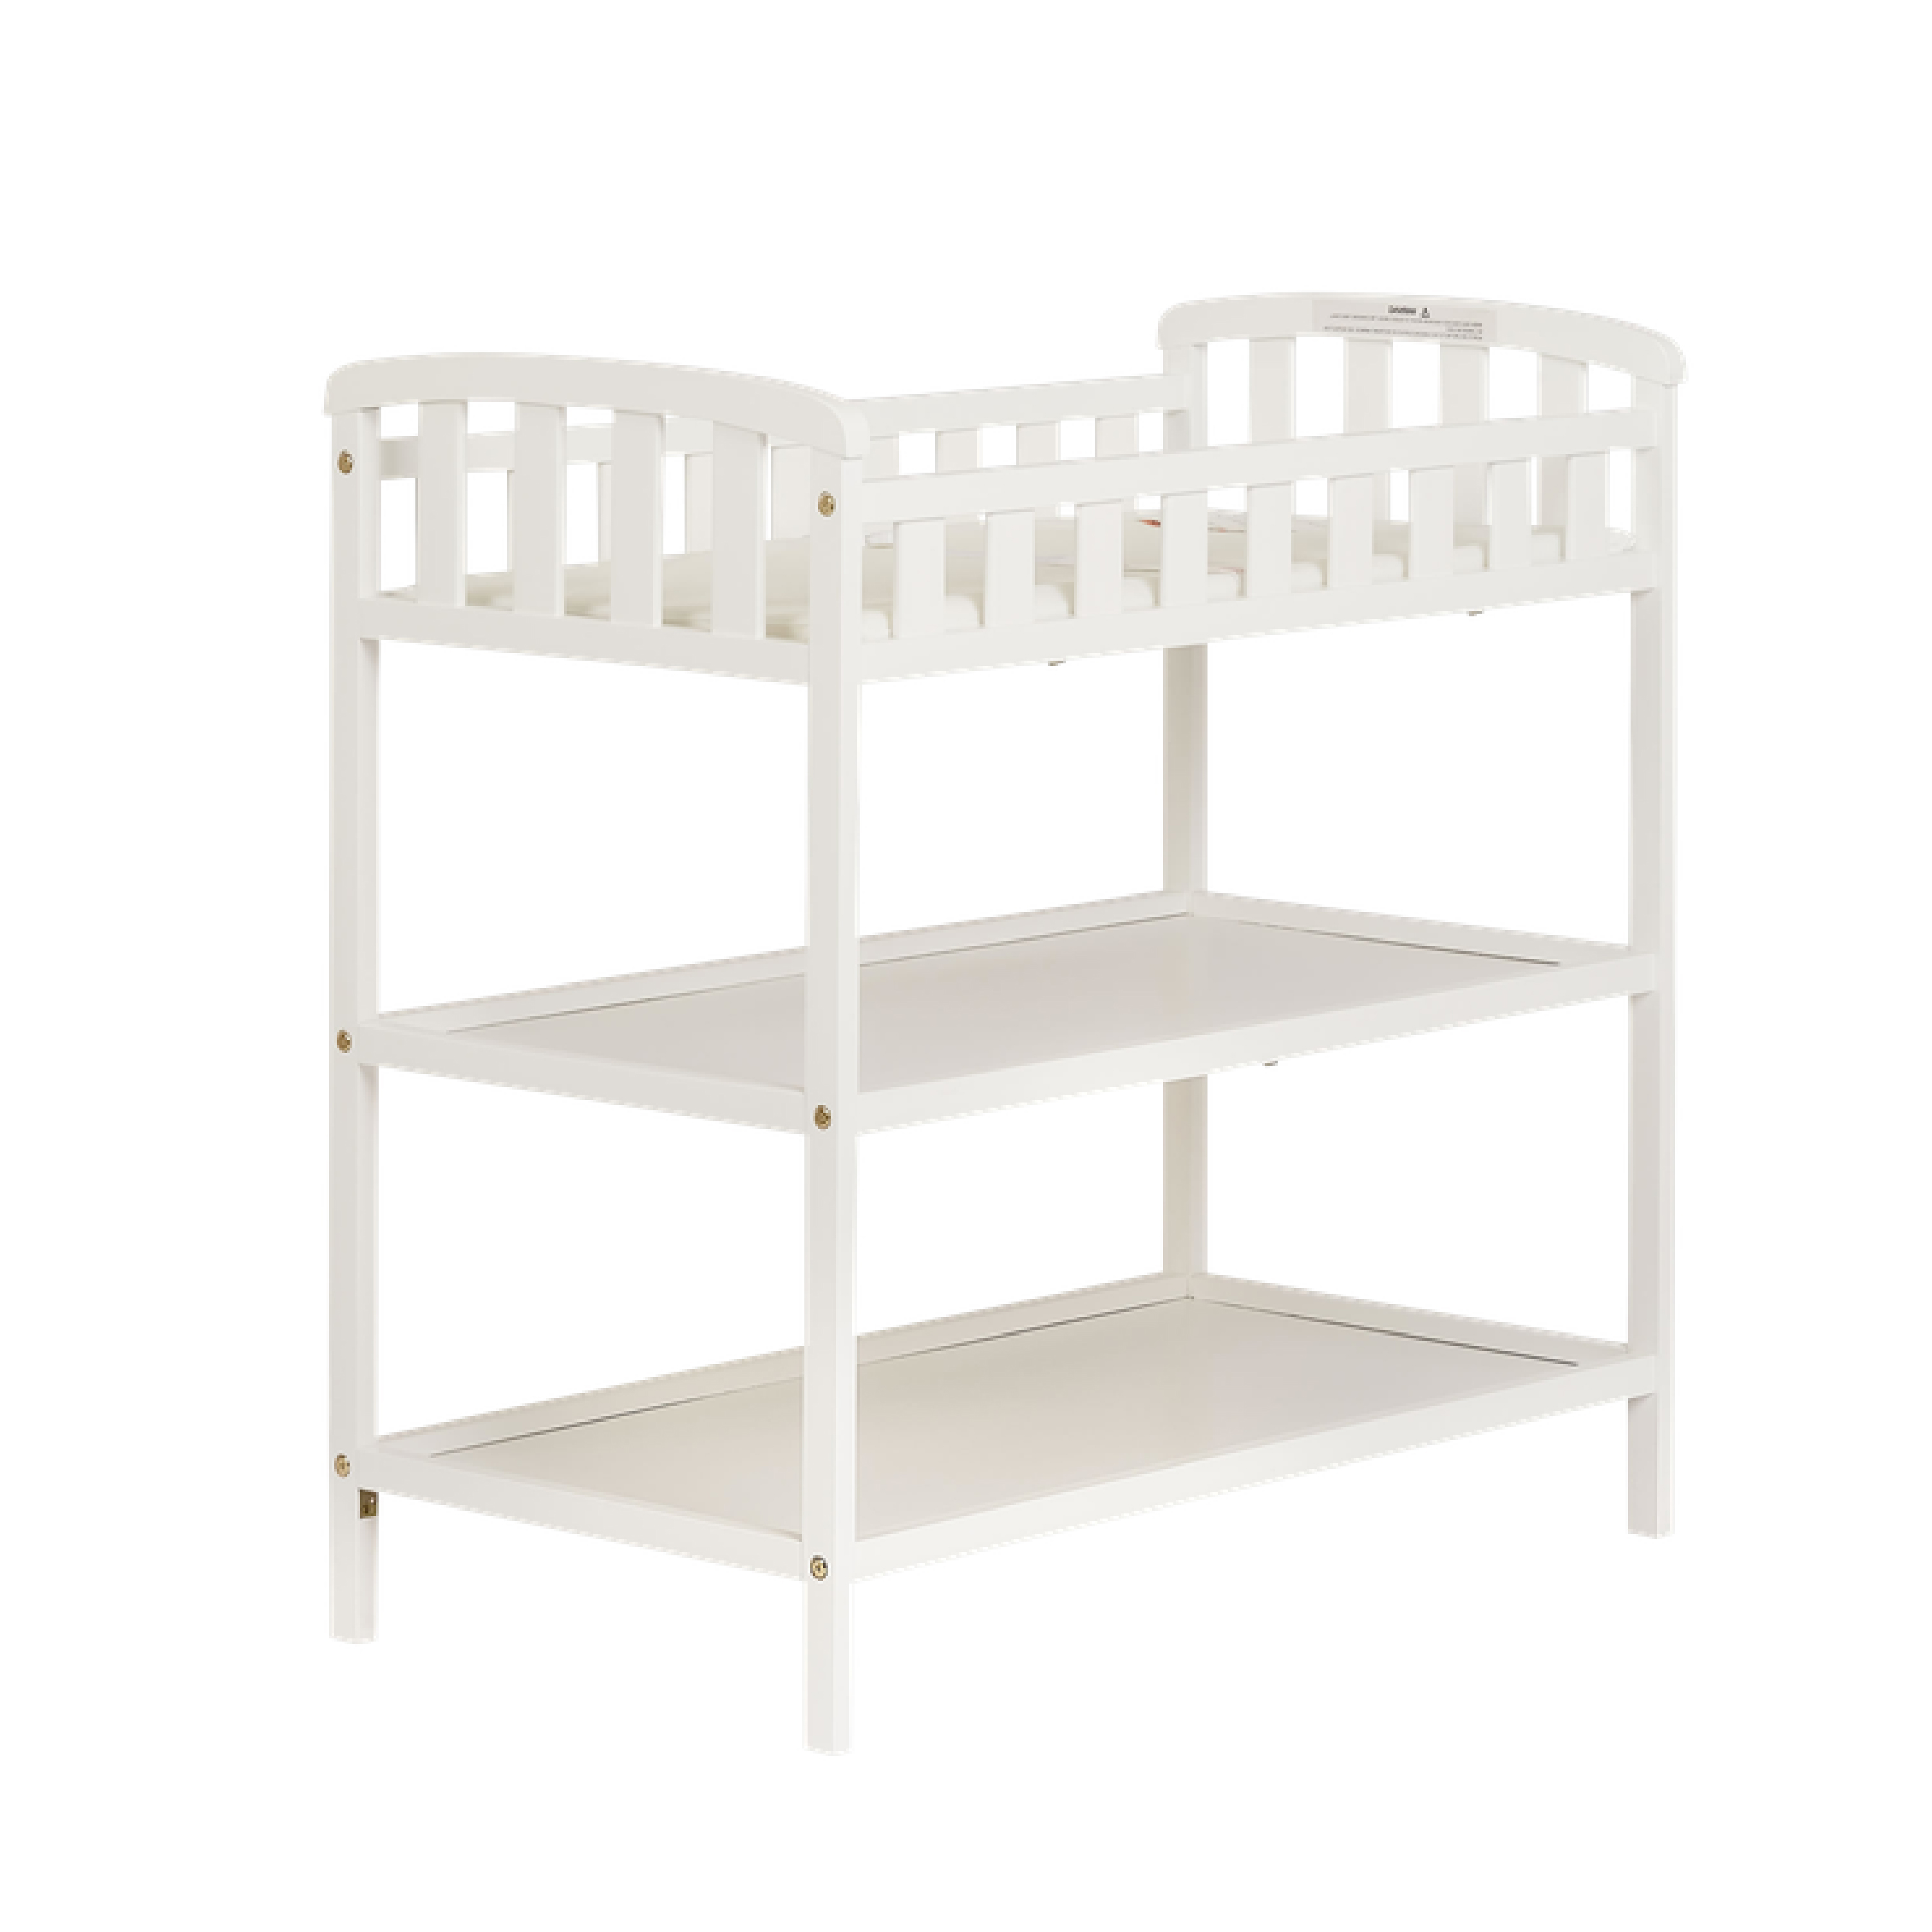 Dream On Me Emily Changing Table, Comes With 1" Changing Pad, Portable Changing Station, White - image 1 of 6